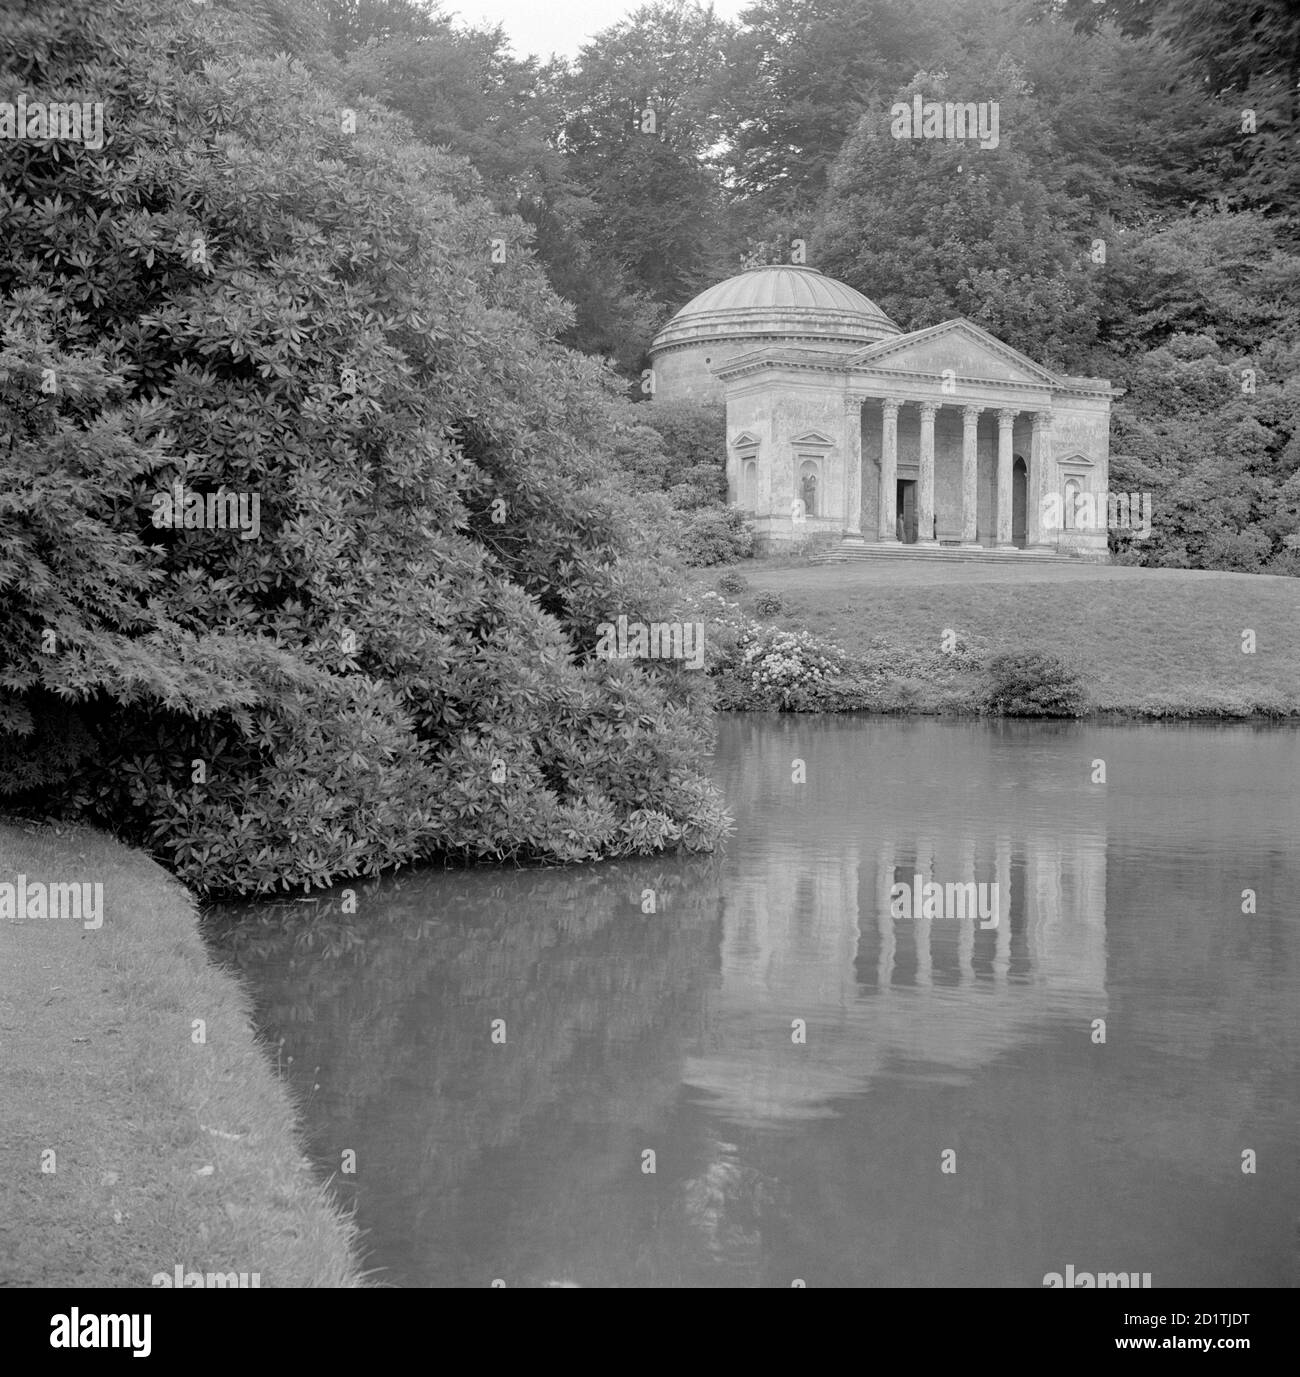 PANTHEON, STOURHEAD PARK, Stourton, Wiltshire. The gardens at Stourhead were landscaped by Henry Hoare II in 1741-1780, and included the creation of a large lake. The Pantheon, designed by Henry Flitcroft around 1753, was one of several garden structures designed as eye-catchers. Photographed by Eric de Mare between 1945 and 1980. Stock Photo